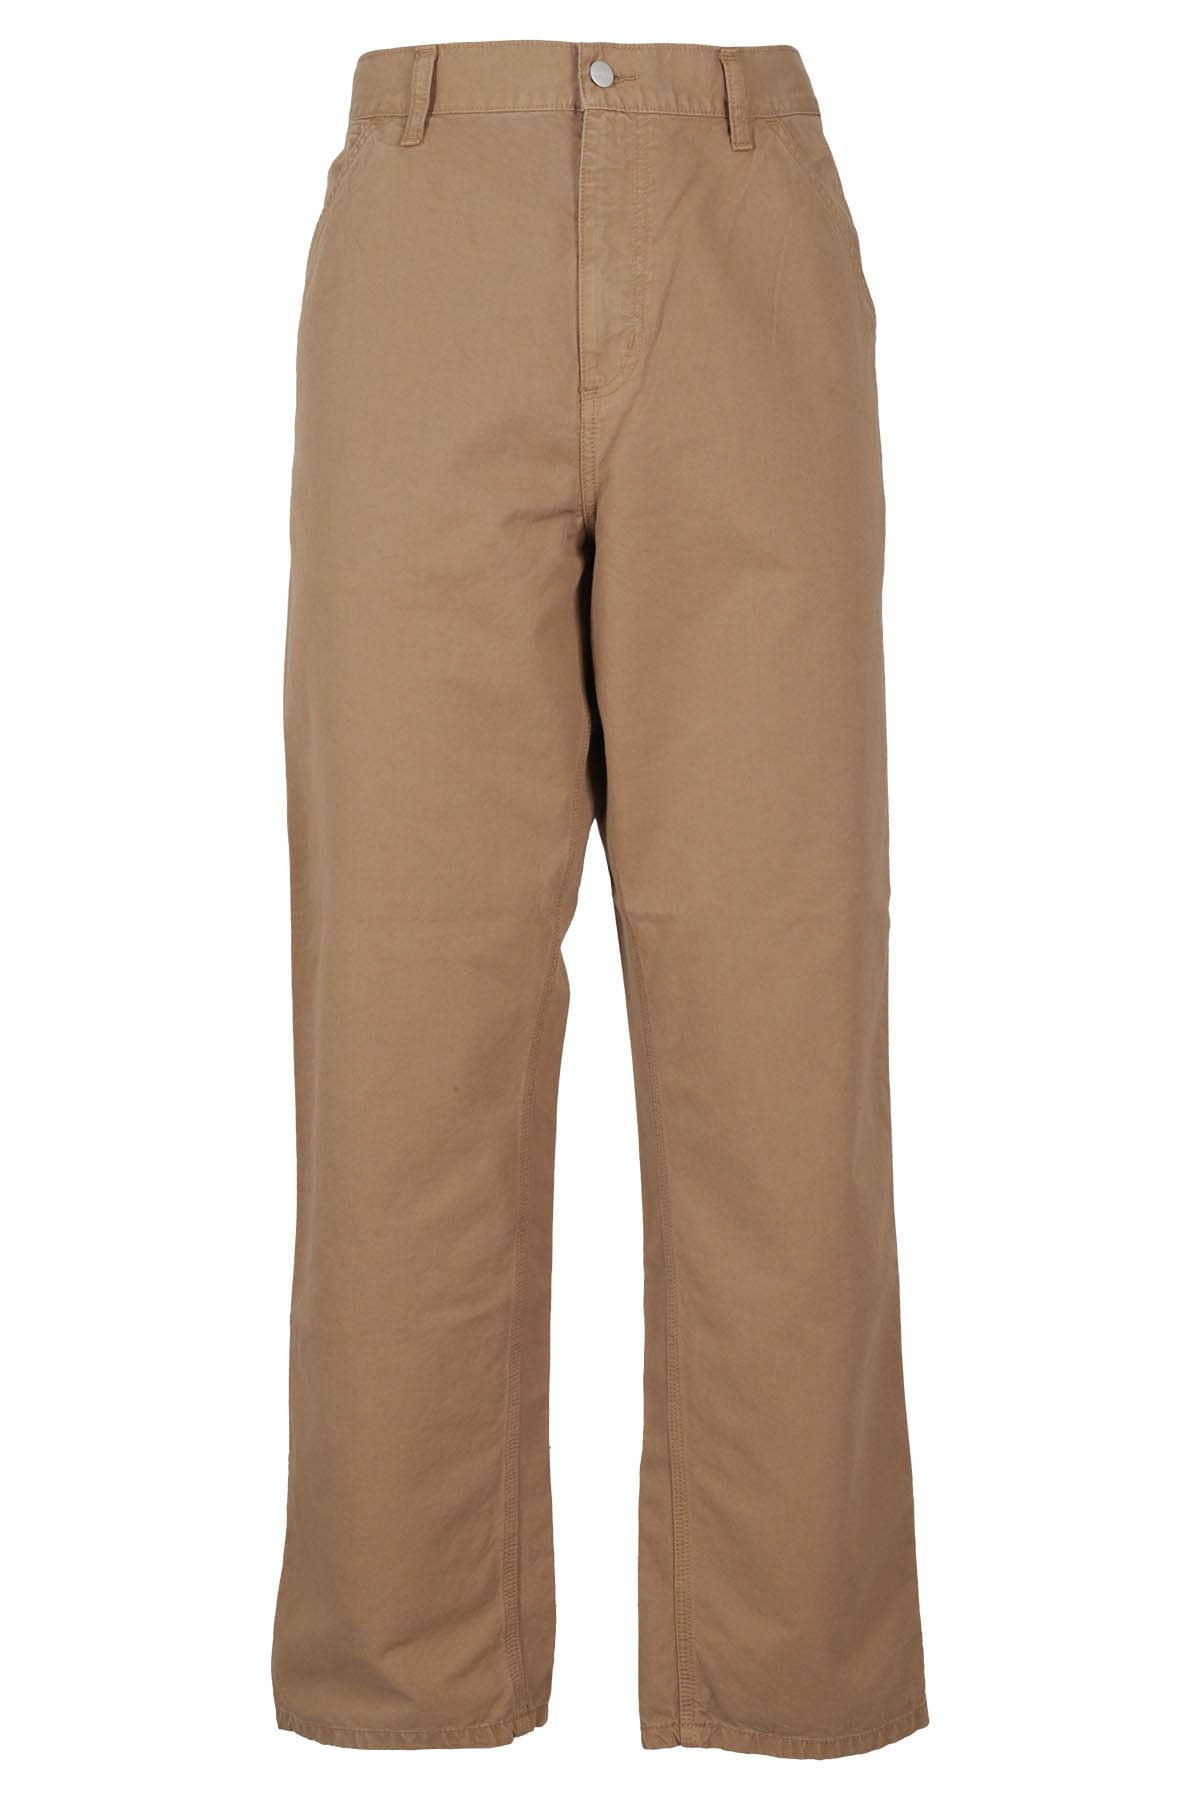 Shop Carhartt Single Knee Pant Newcomb Drill In Buffalo Garment Dyed